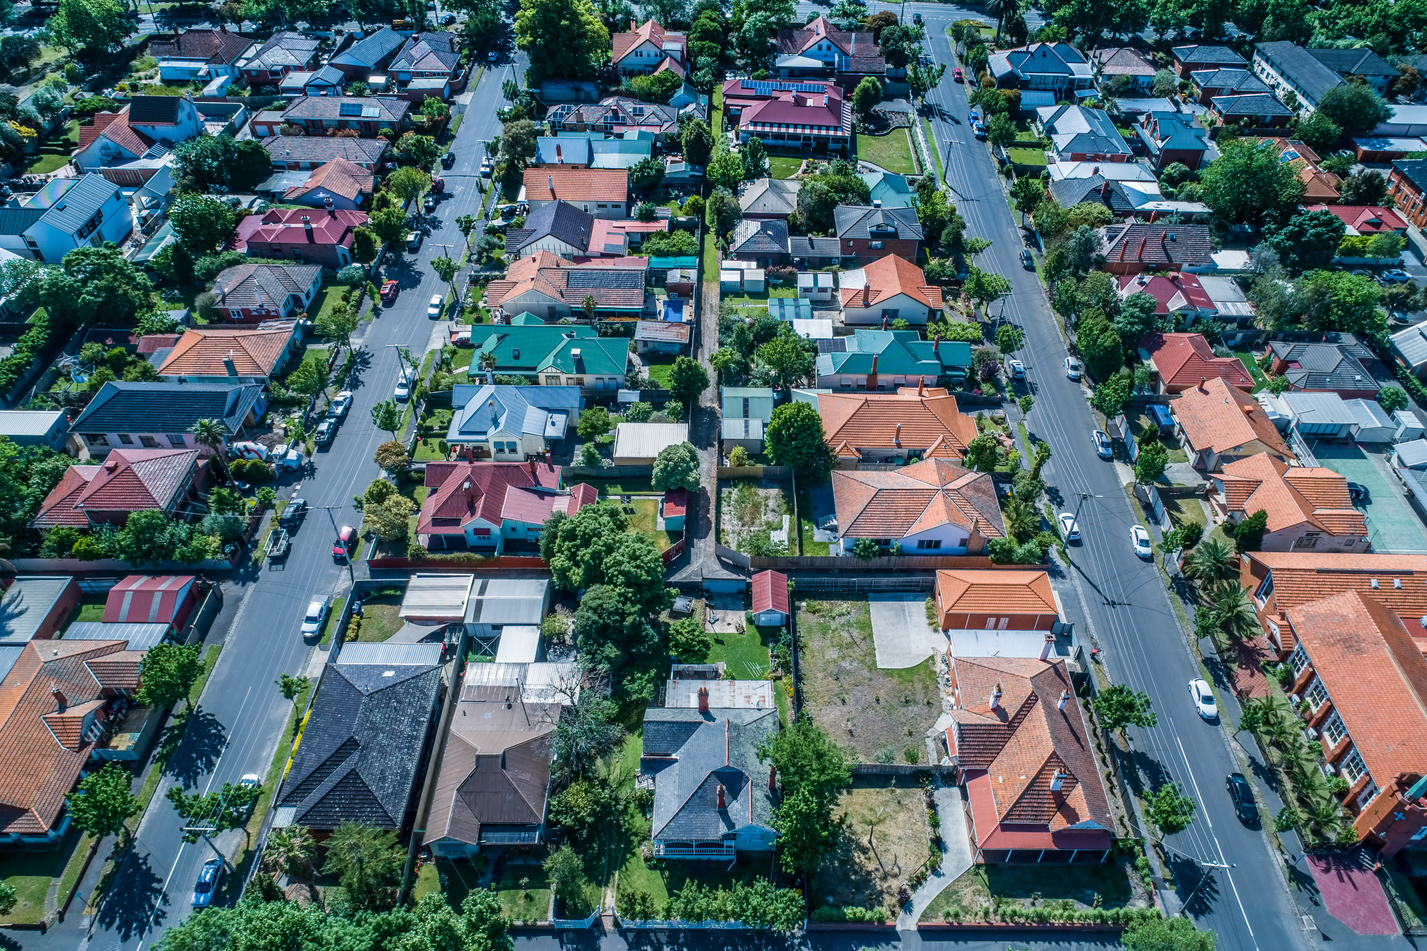 Looking down at houses in typical Australian suburb - aerial view